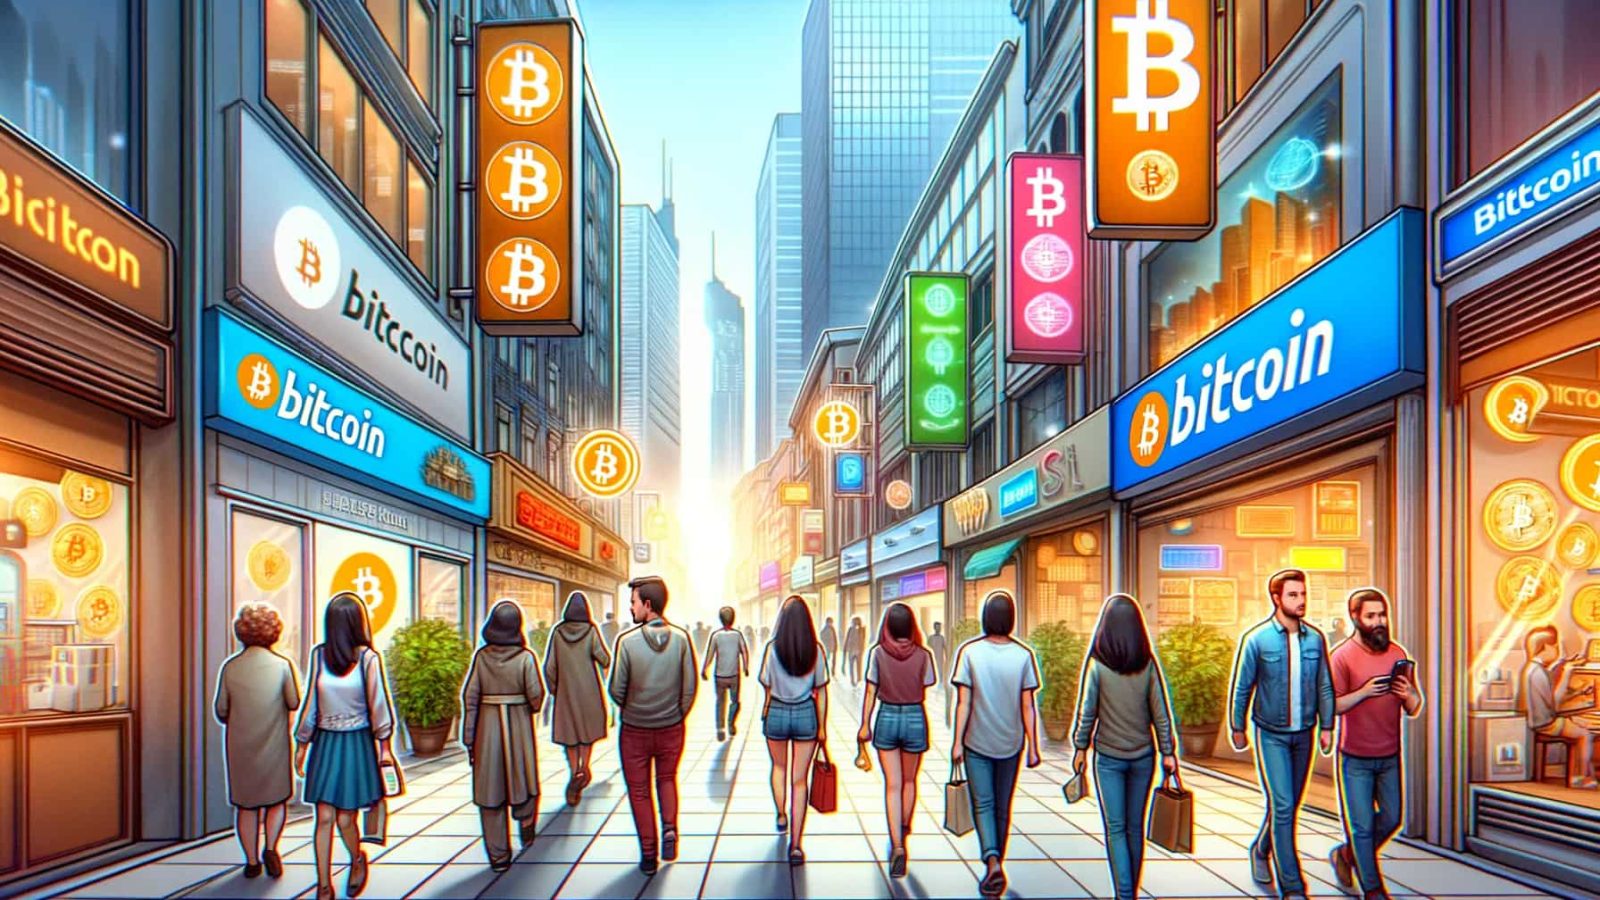 DALL·E 2024-01-11 17.35.43 - A bustling city street lined with various physical stores, each with a distinct sign indicating they accept Bitcoin. People of diverse appearances are